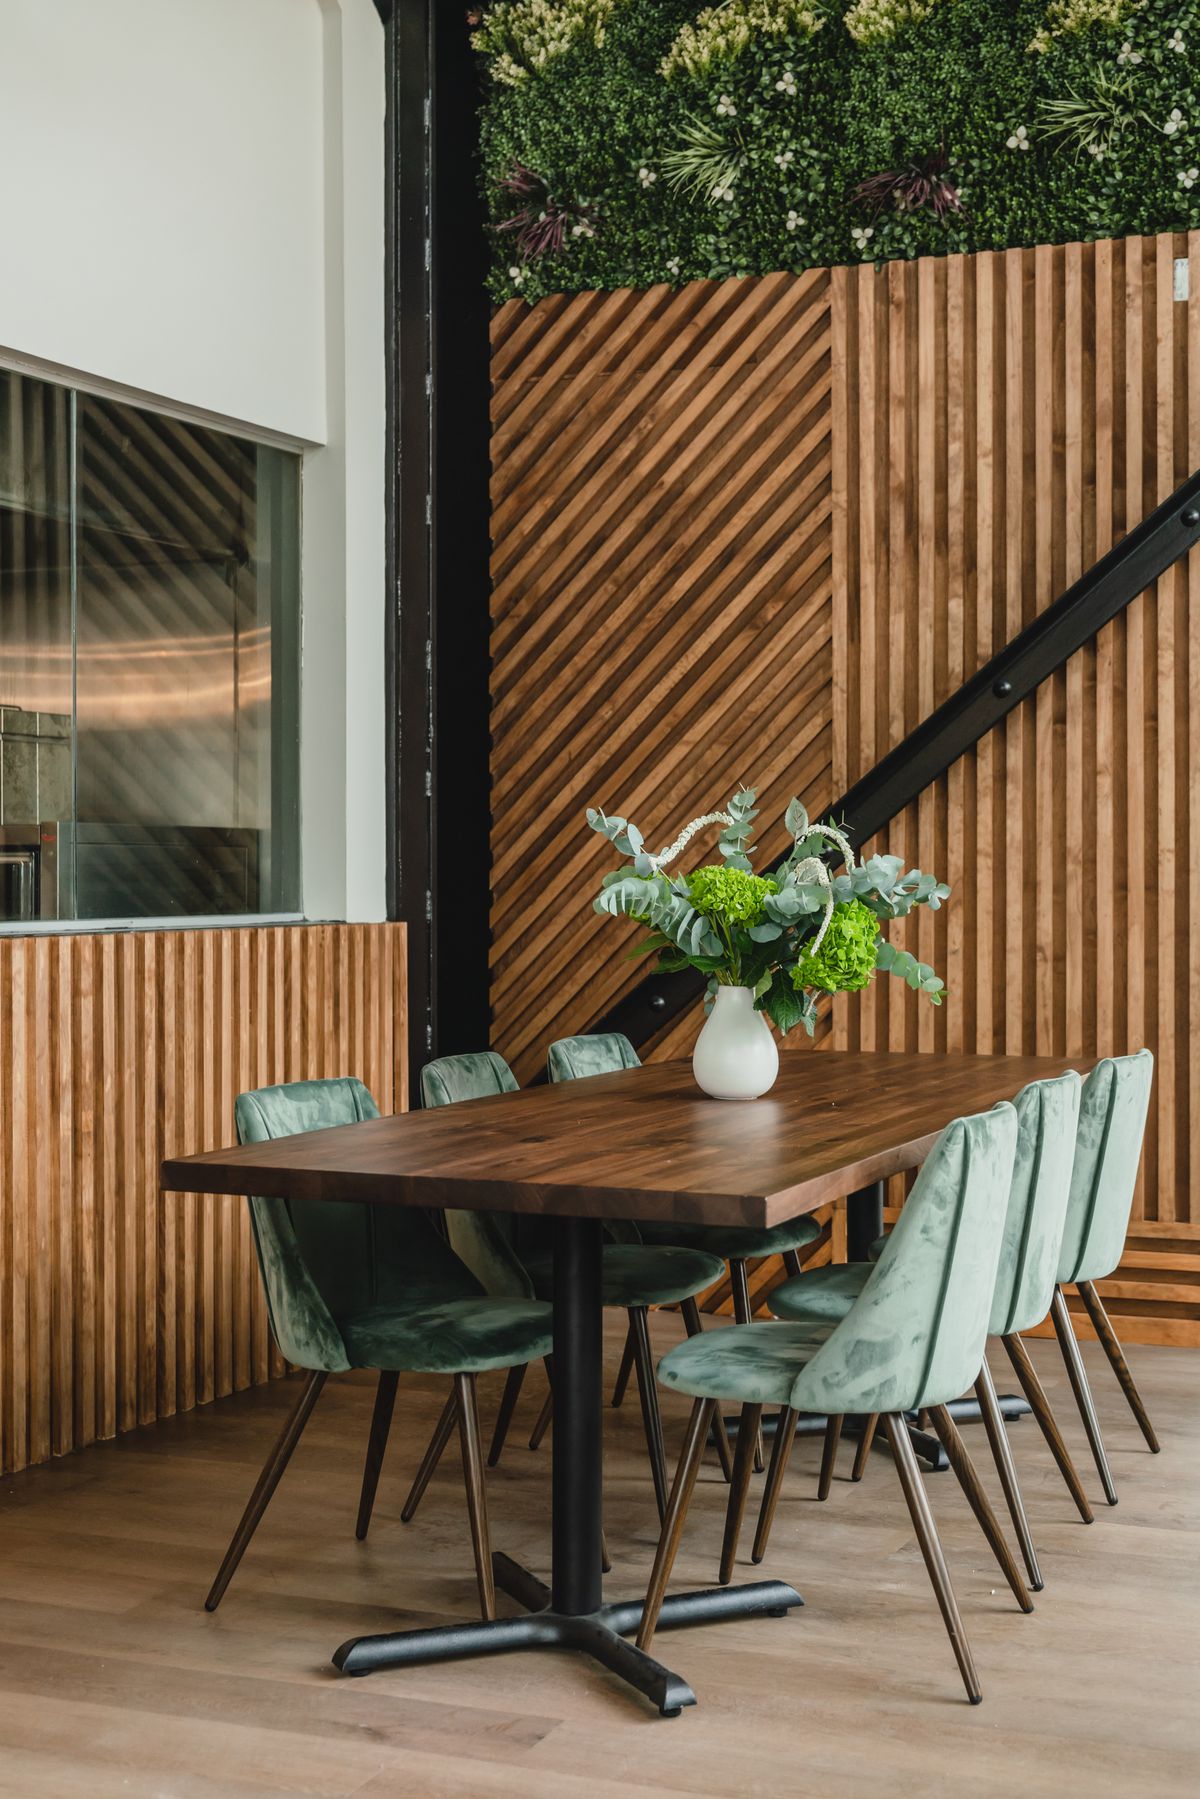 A dining table with light green chairs in front of a wood-paneled wall.